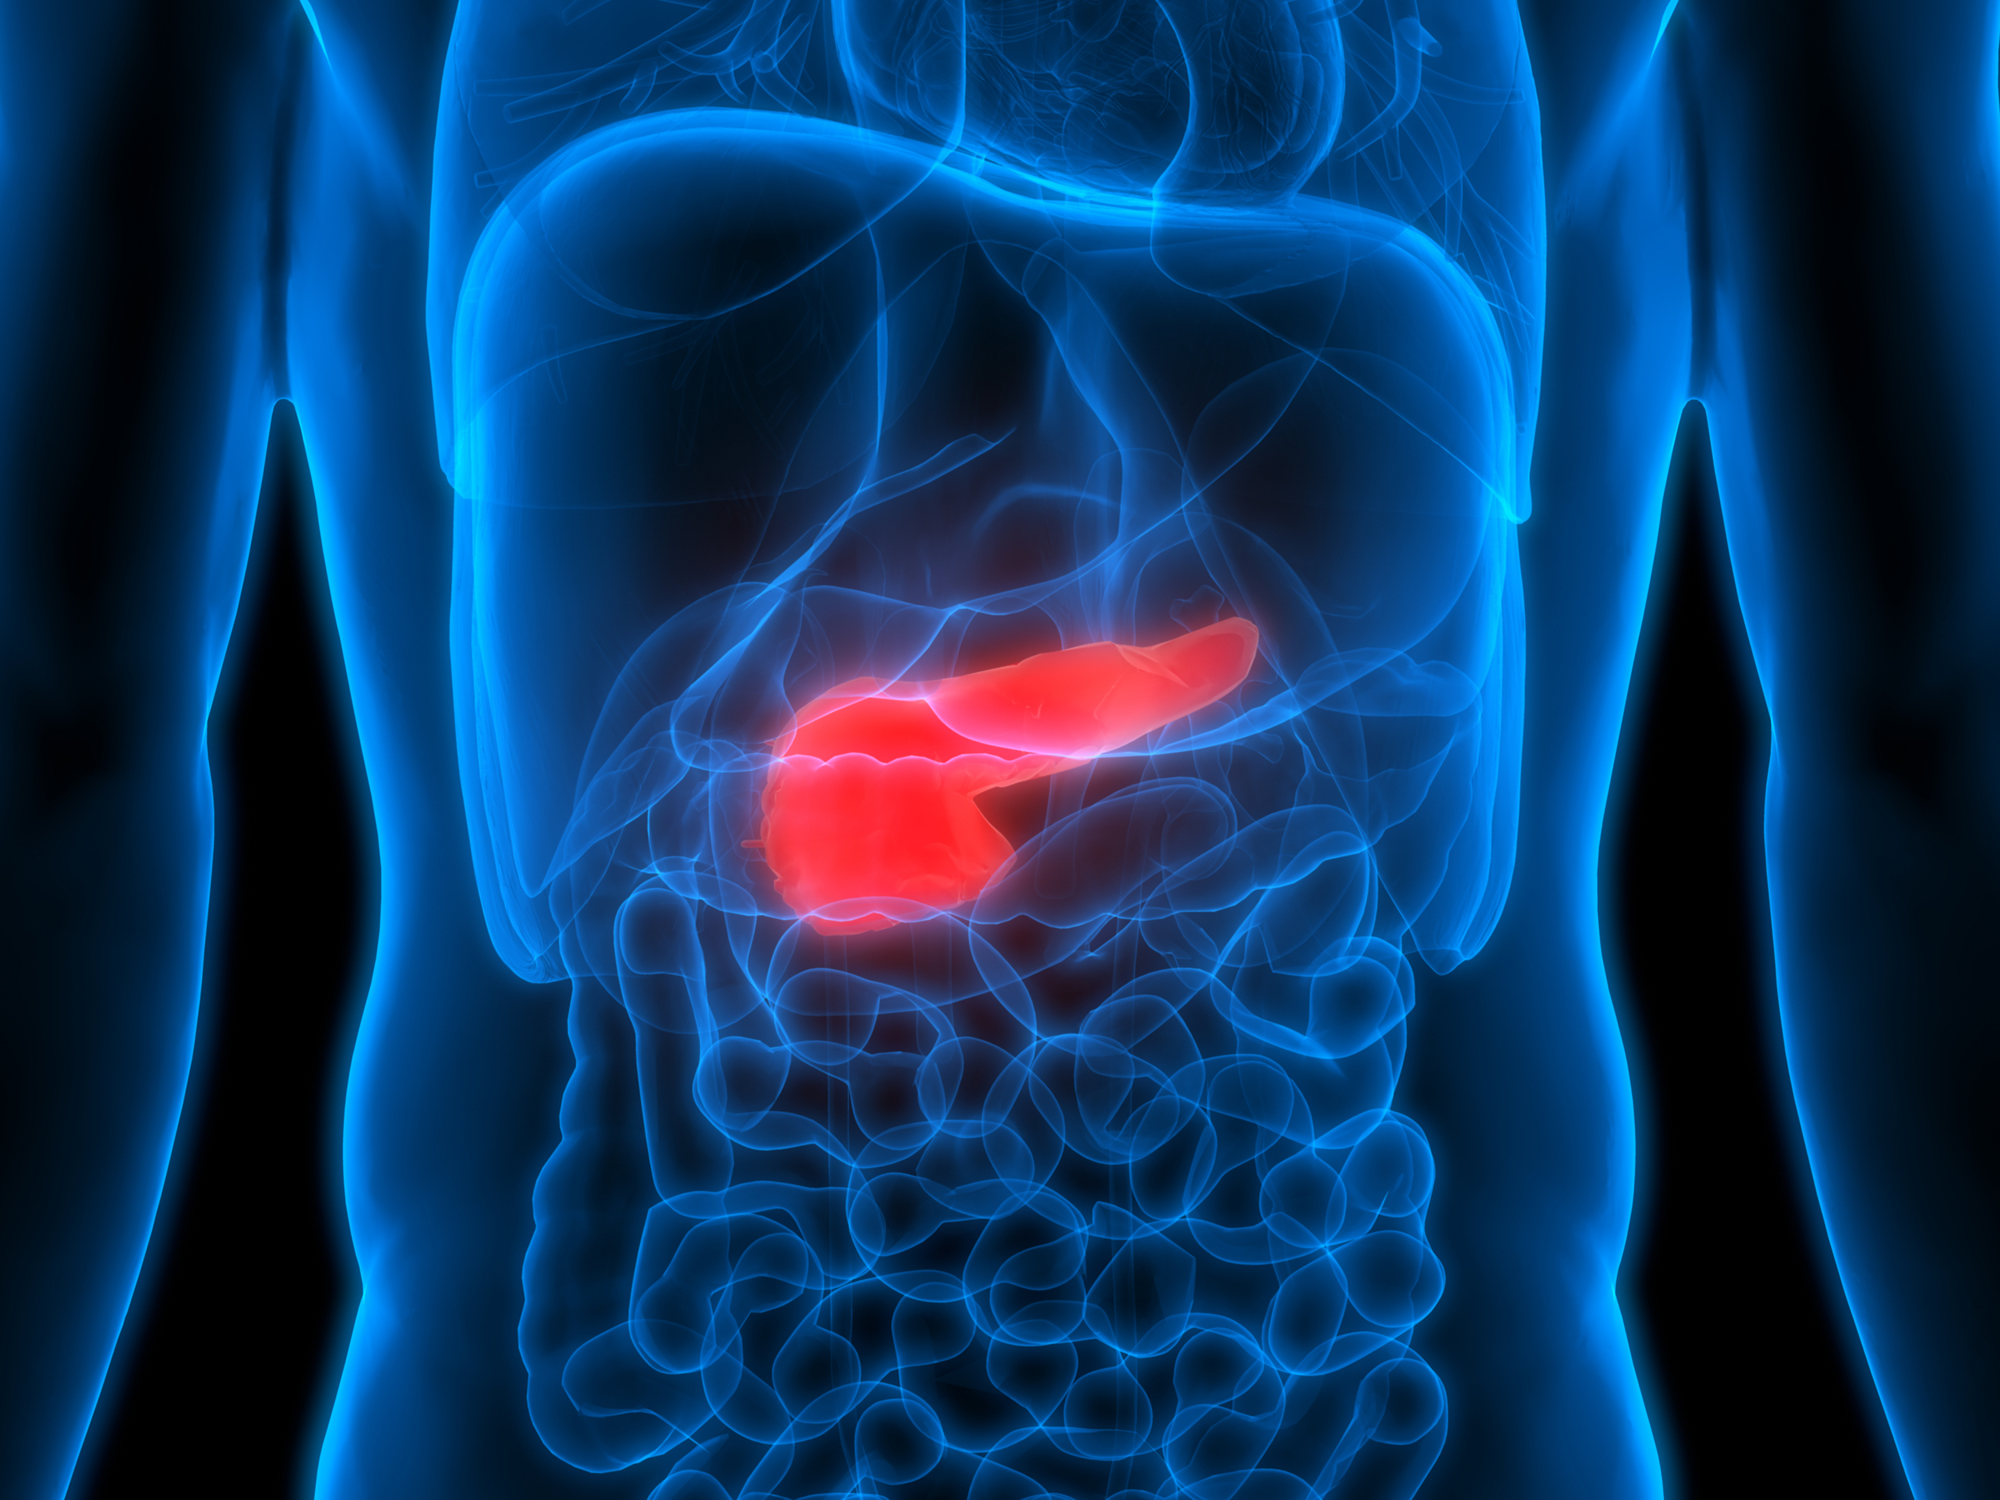 Does type 2 diabetes set you up for the deadliest of cancers?